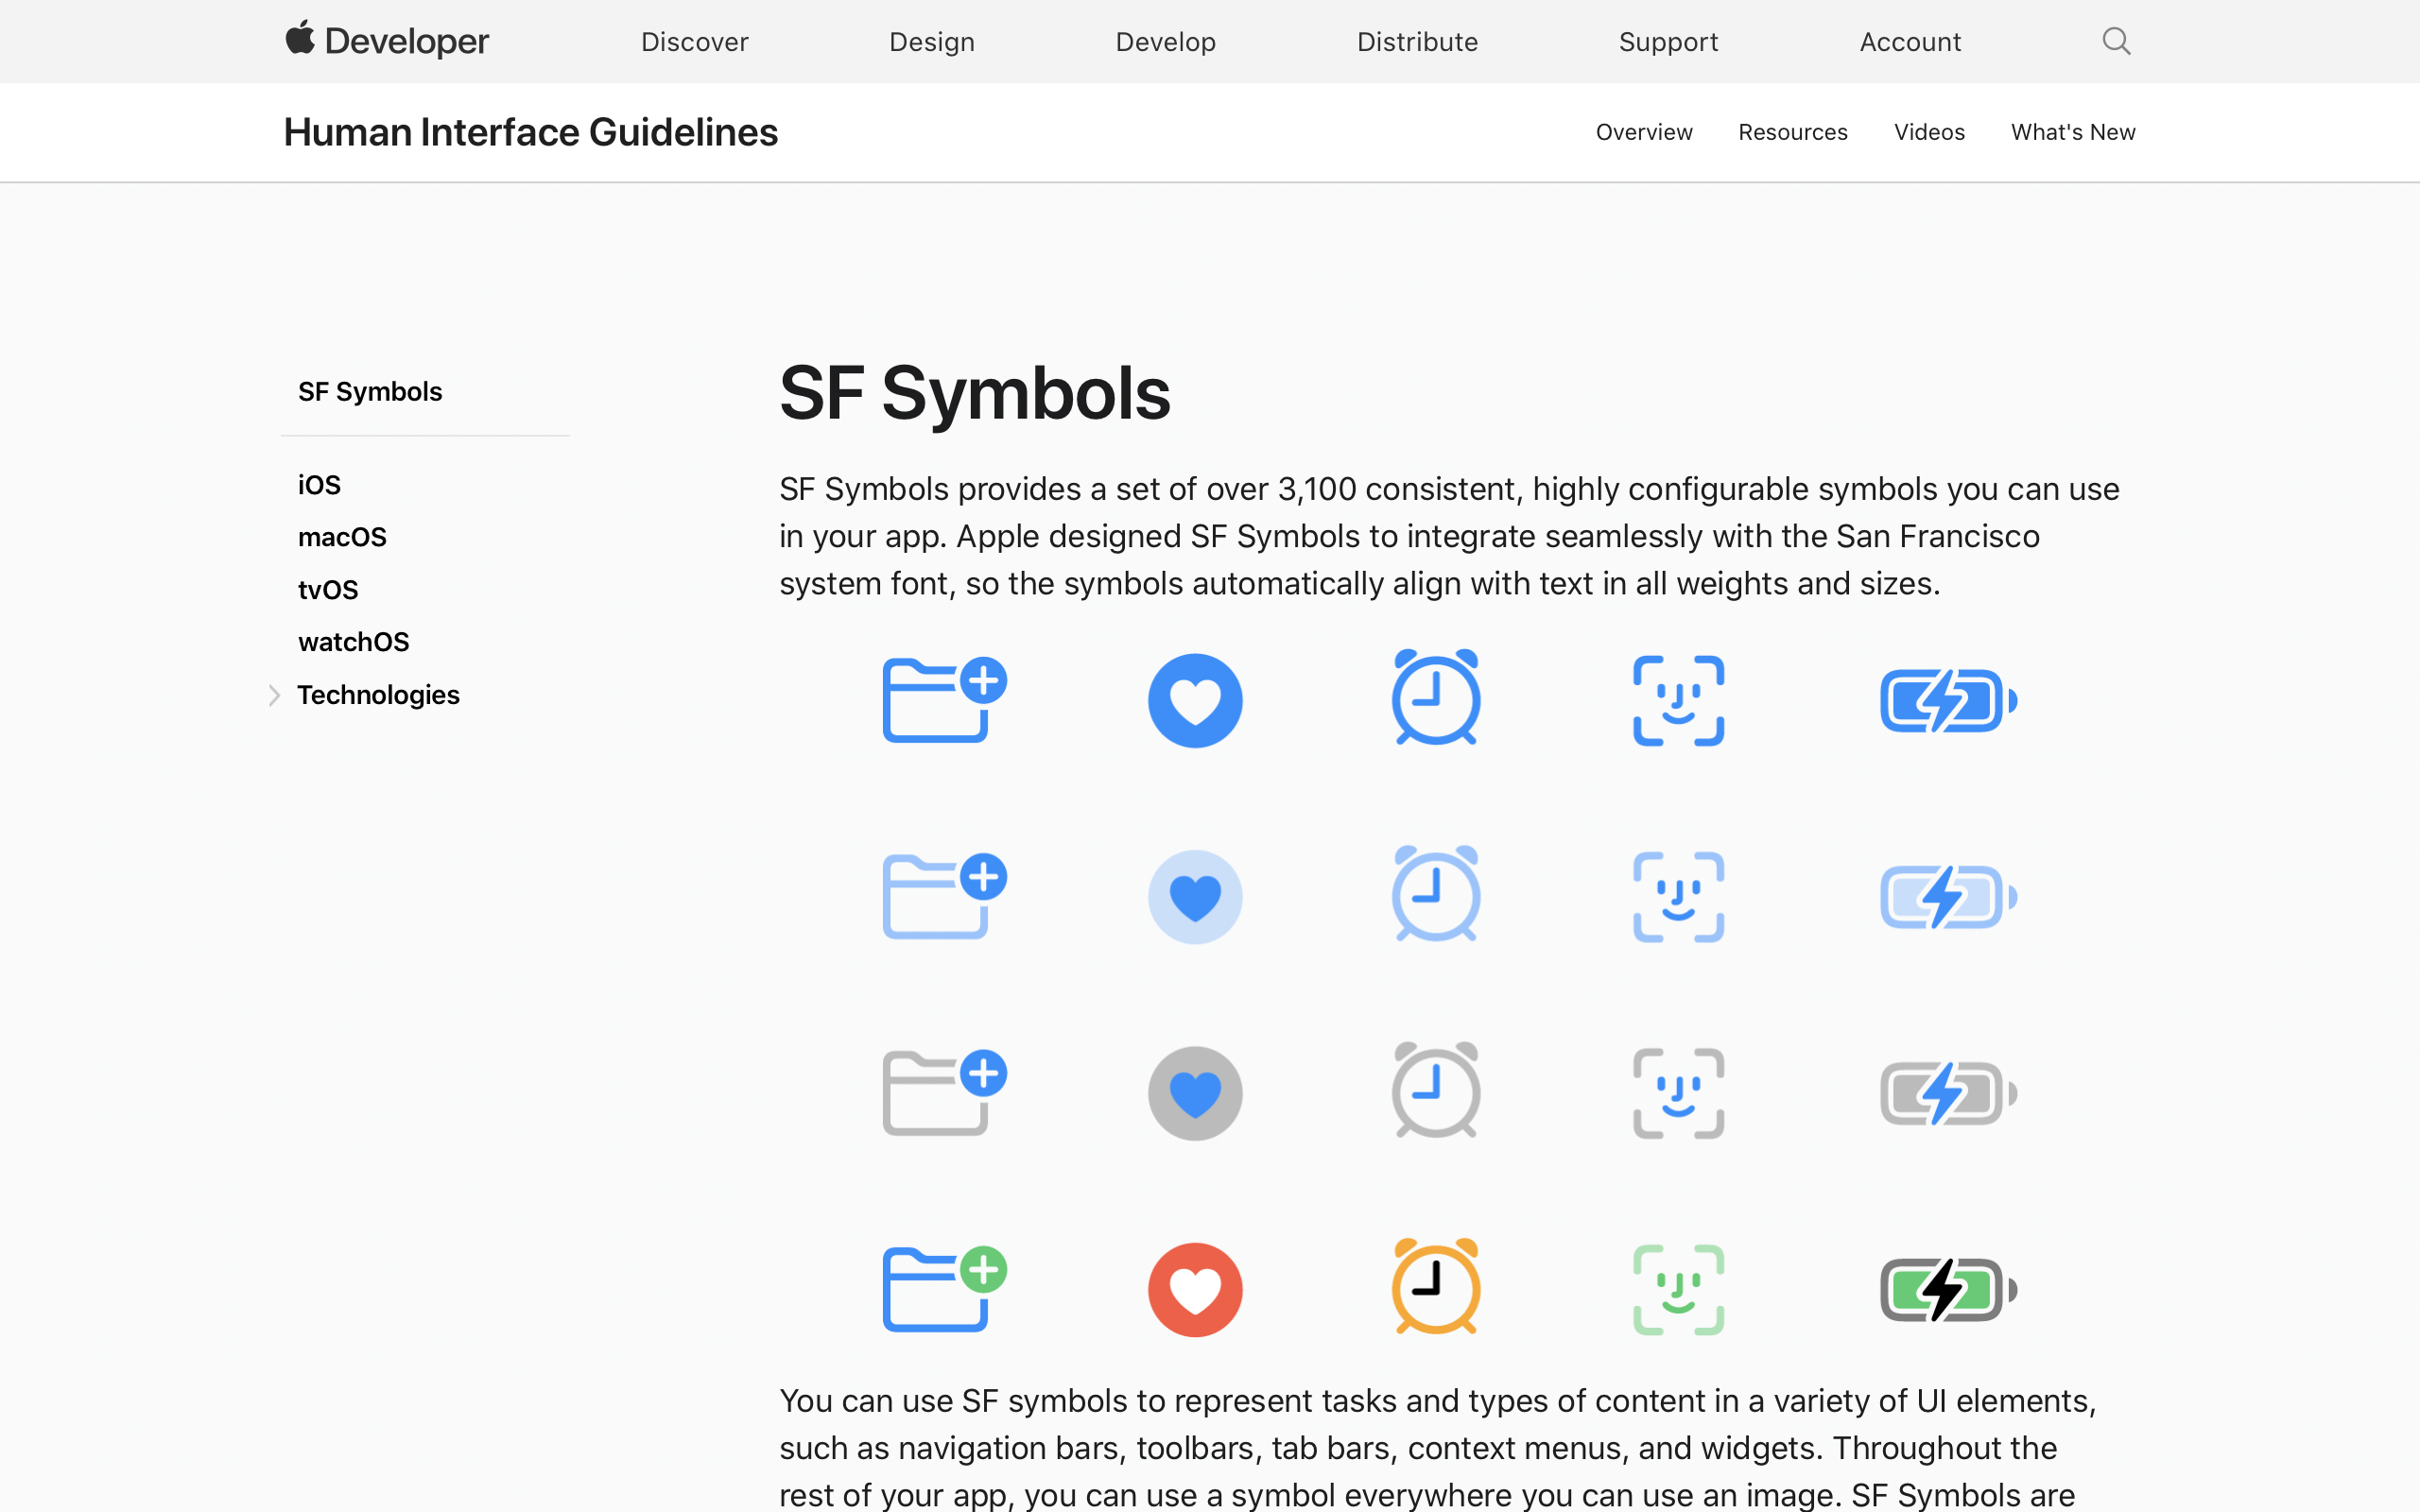 Wikipedia for iOS app: Icons